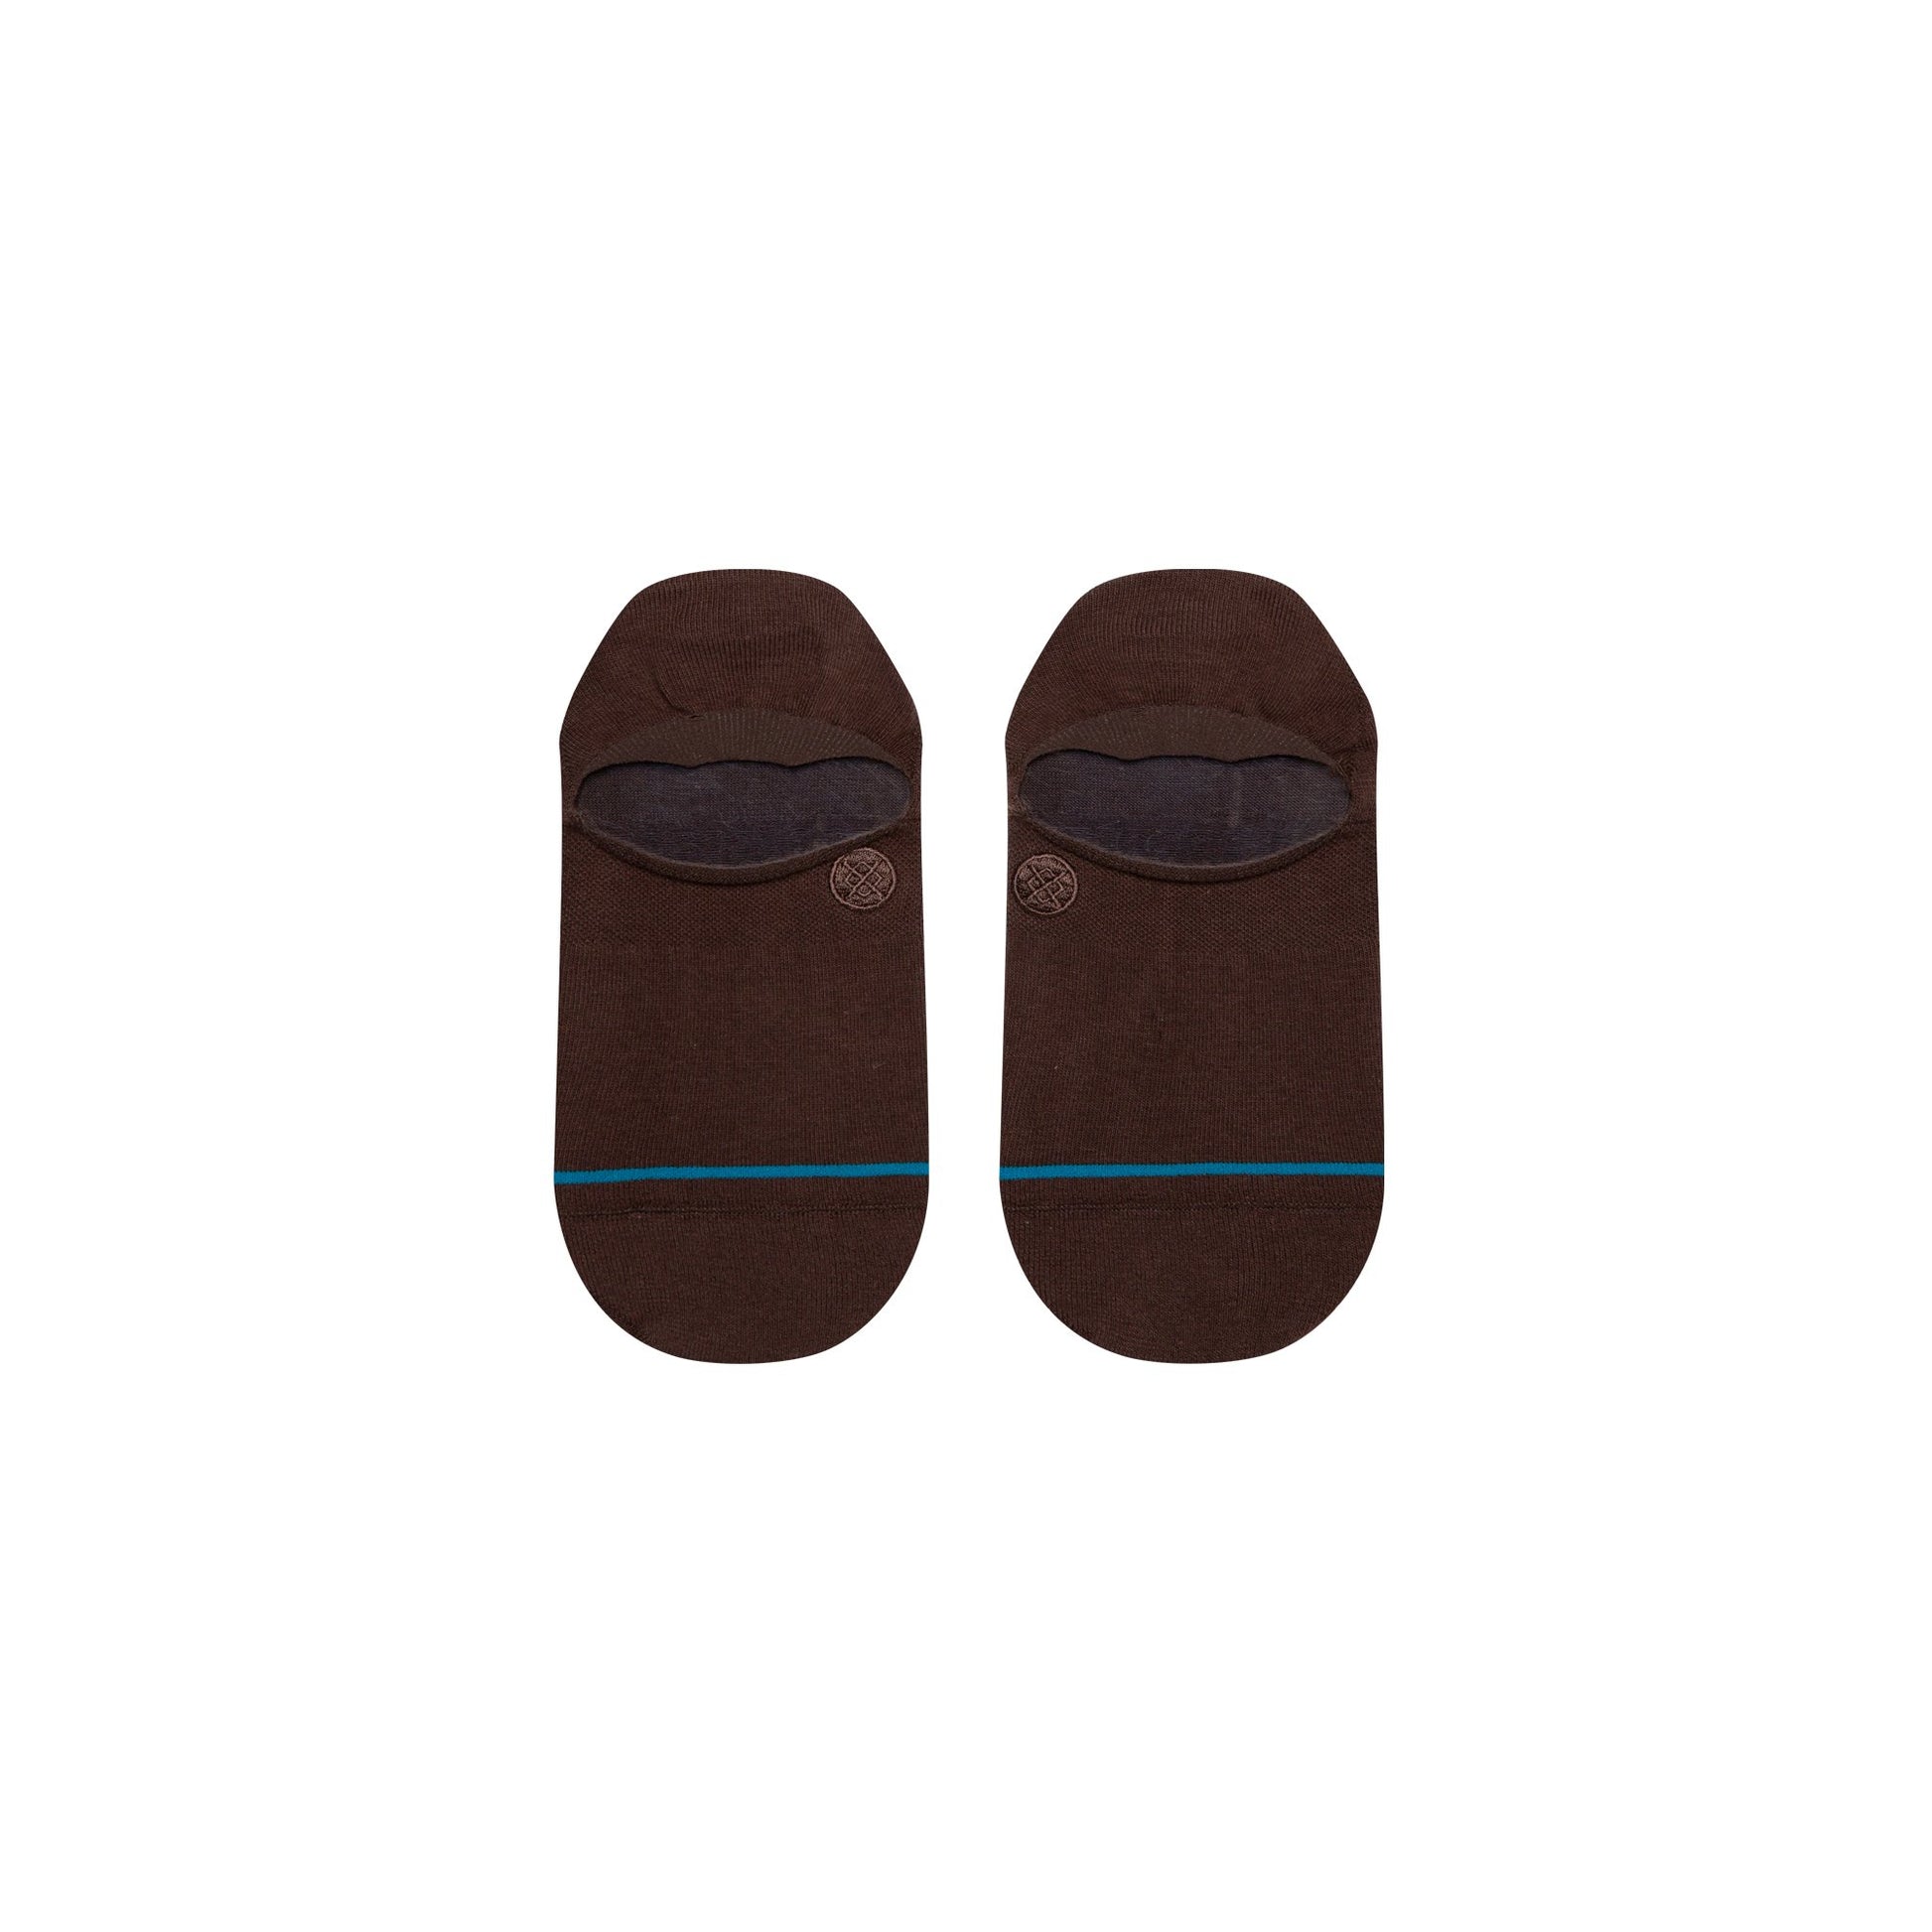 Stance Socks ICON NO SHOW SOCK BROWN